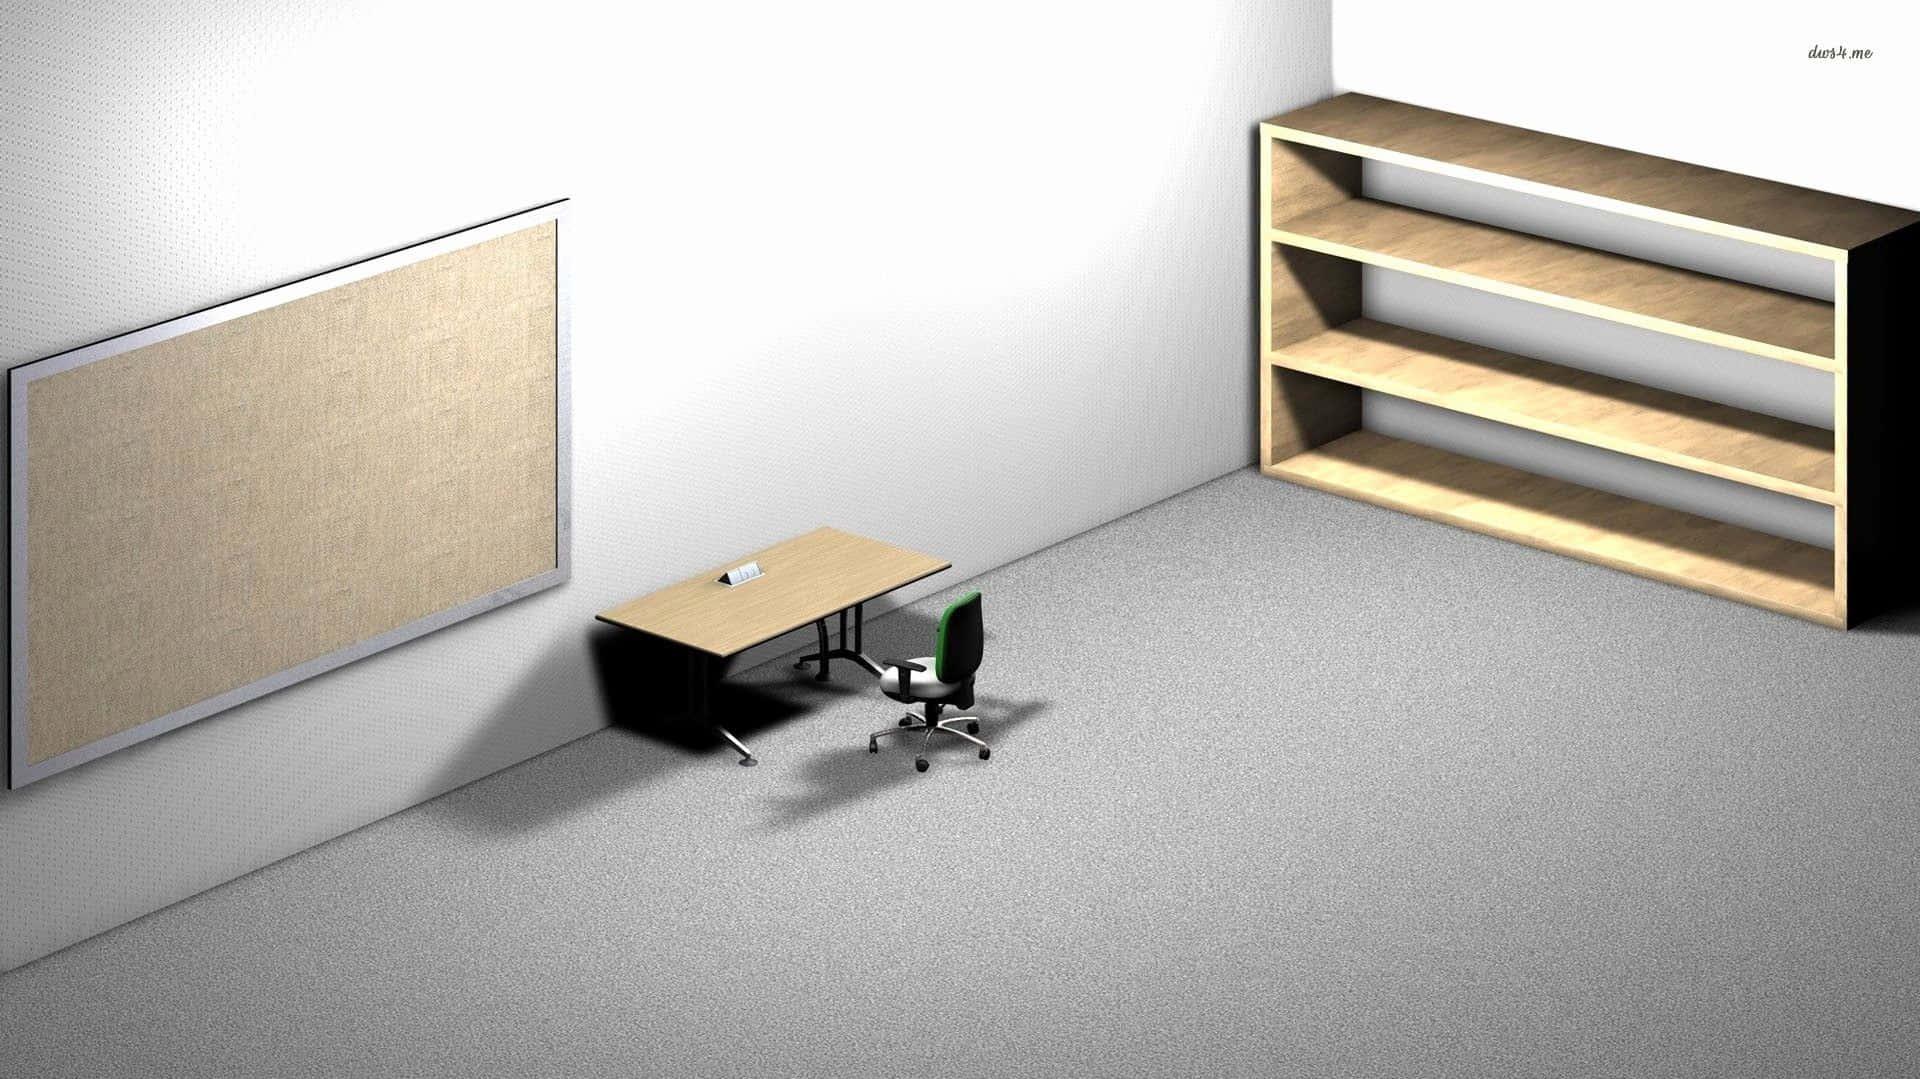 A 3d Model Of Room With Desk And Shelf Wallpaper